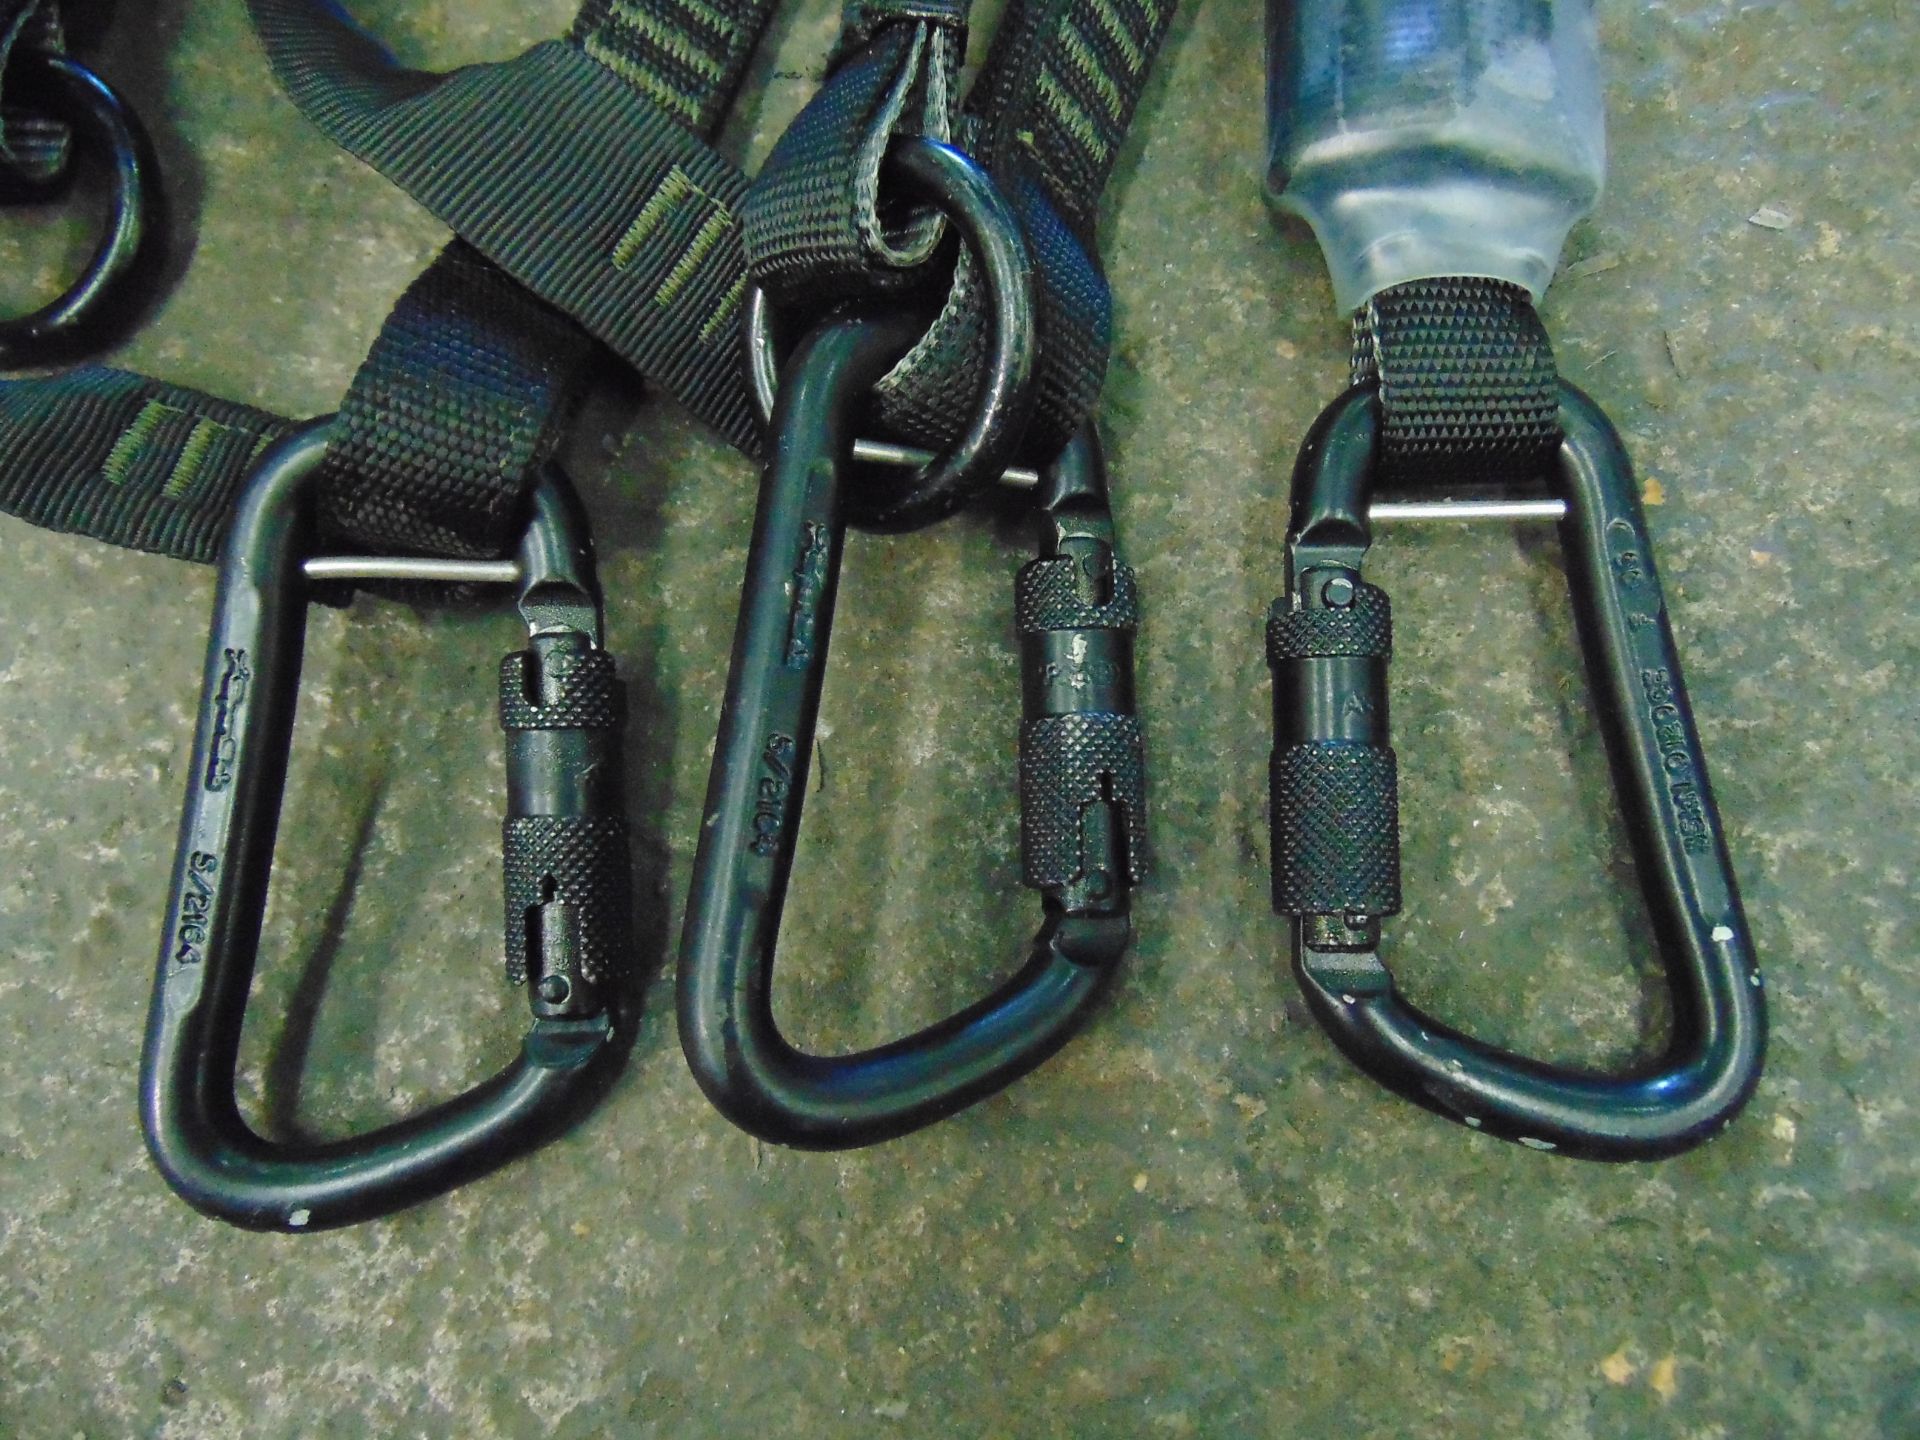 Spanset Full Body Harness with Work Position Lanyards etc - Image 10 of 24